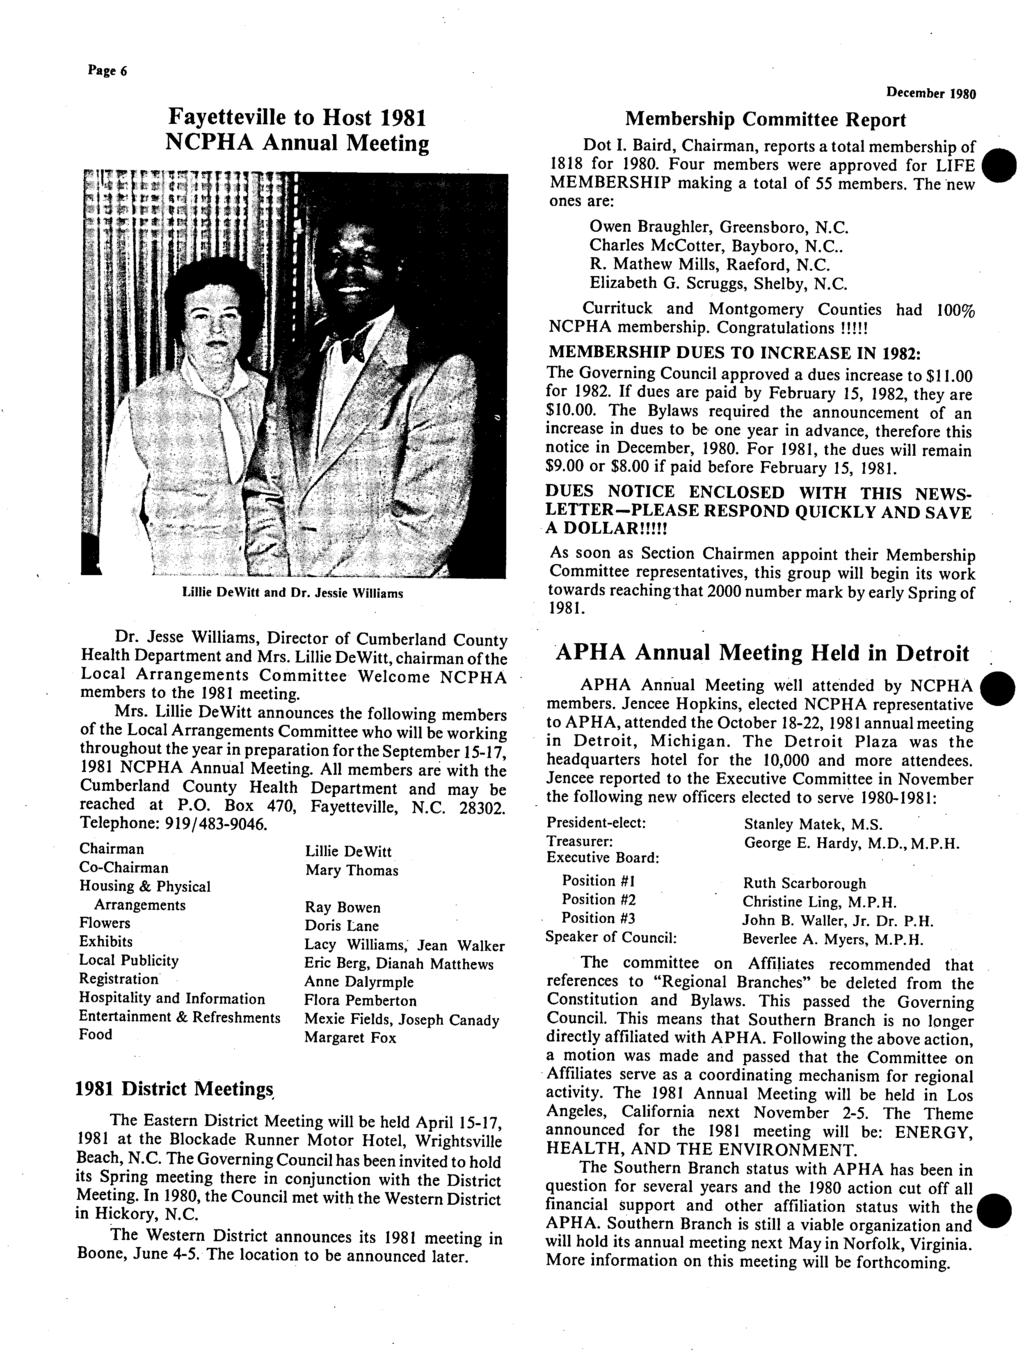 Page 6 Fayetteville to Host 1981 NCPHA Annual Meeting Lillie DeWitt and Dr. Jessie Williams Dr. Jesse Williams, Director of Cumberland County Health Department and Mrs.